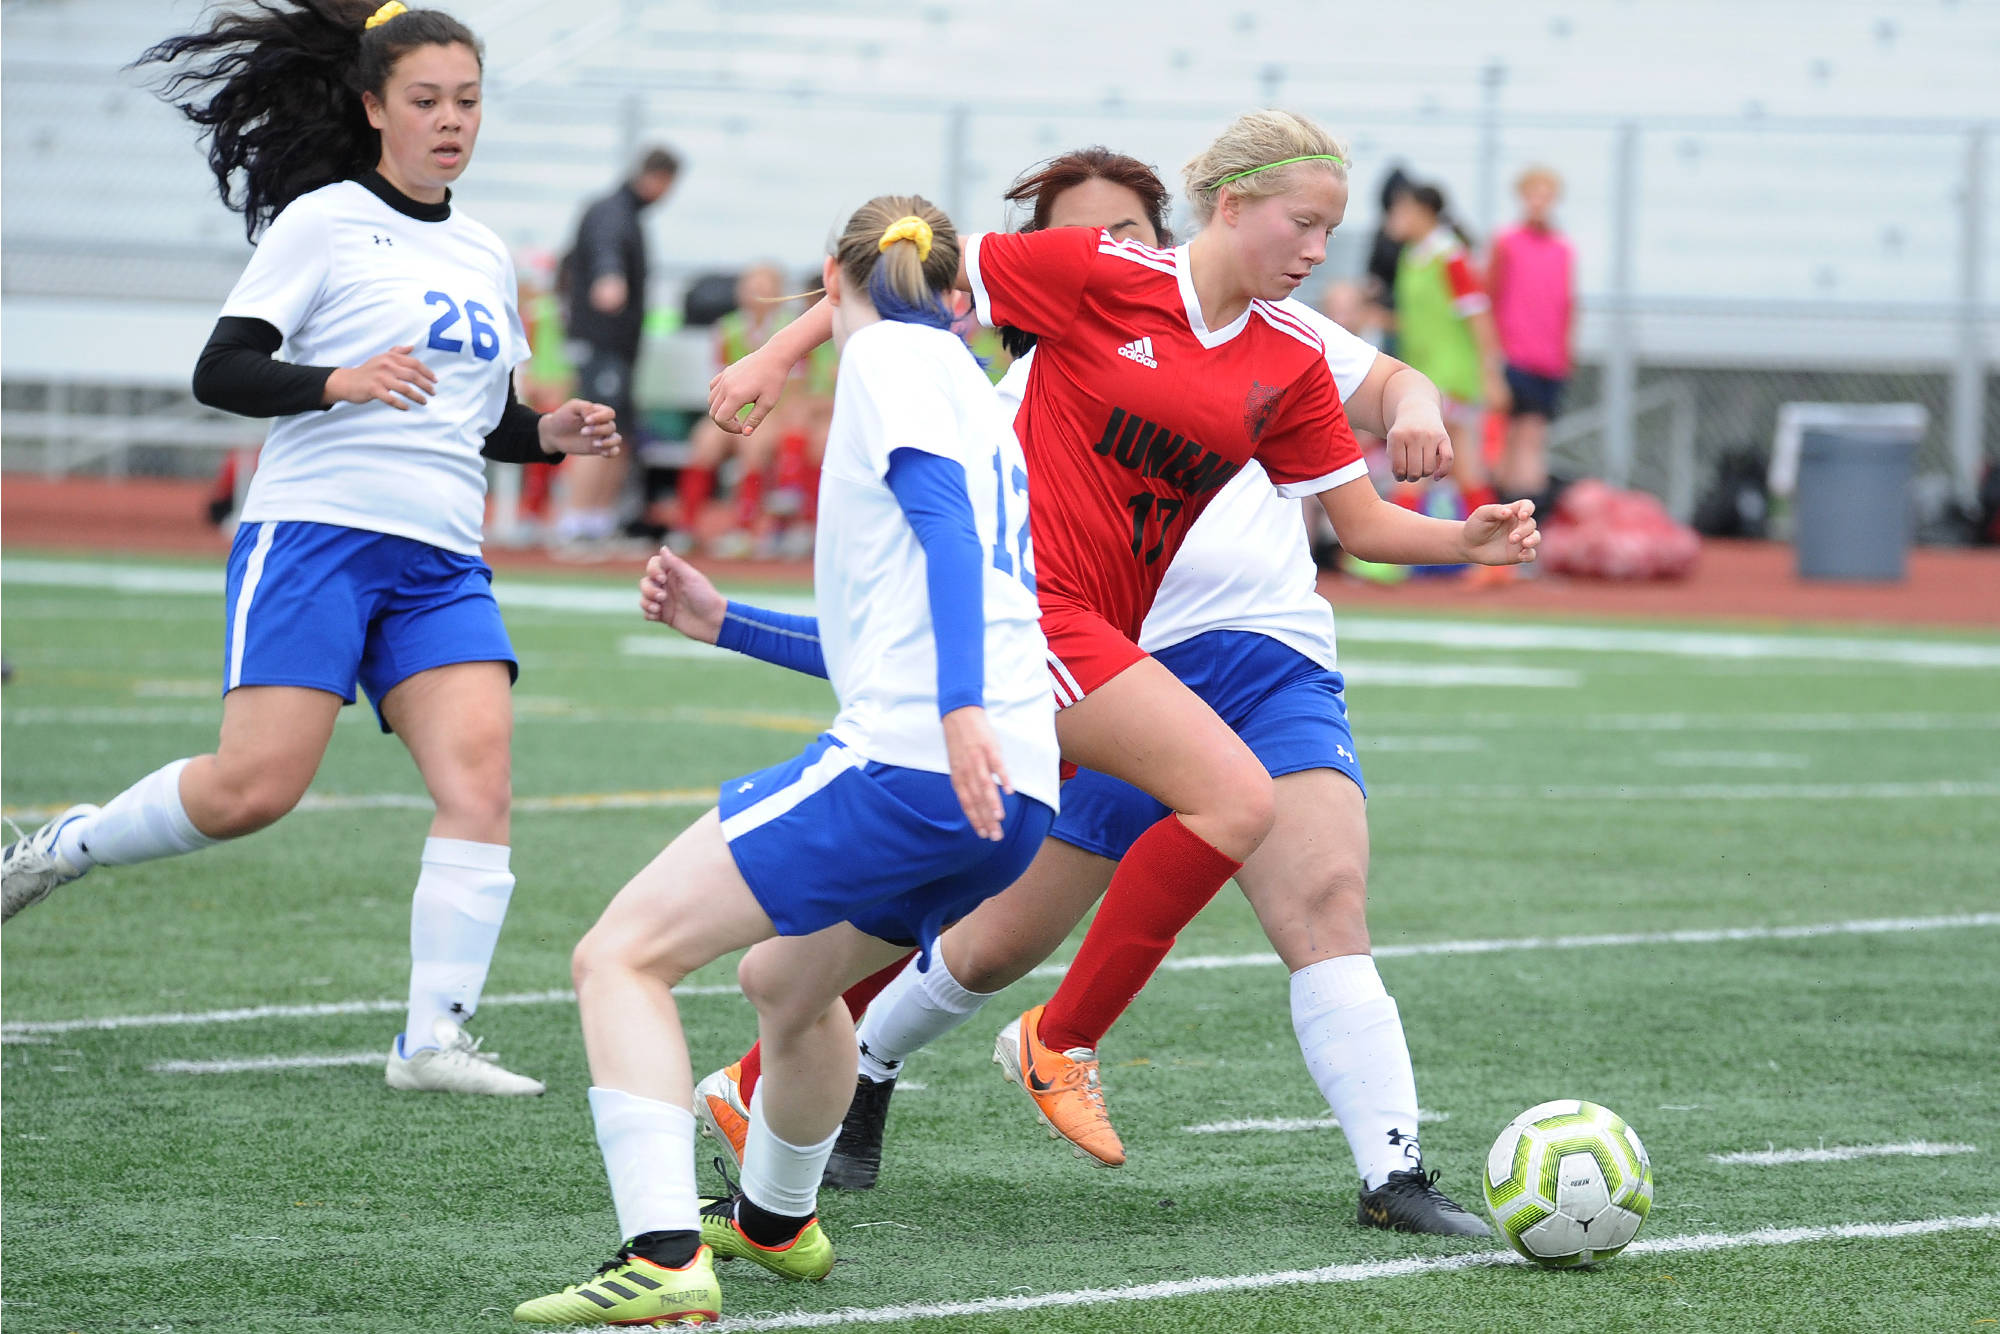 Juneau-Douglas’ Taylor Bentley busts through a trio Kodiak defenders during the ASAA/First National Bank Alaska soccer state championships at Service High School in Anchorage on Thursday, May 23, 2019. (Michael Dinneen | For the Juneau Empire)